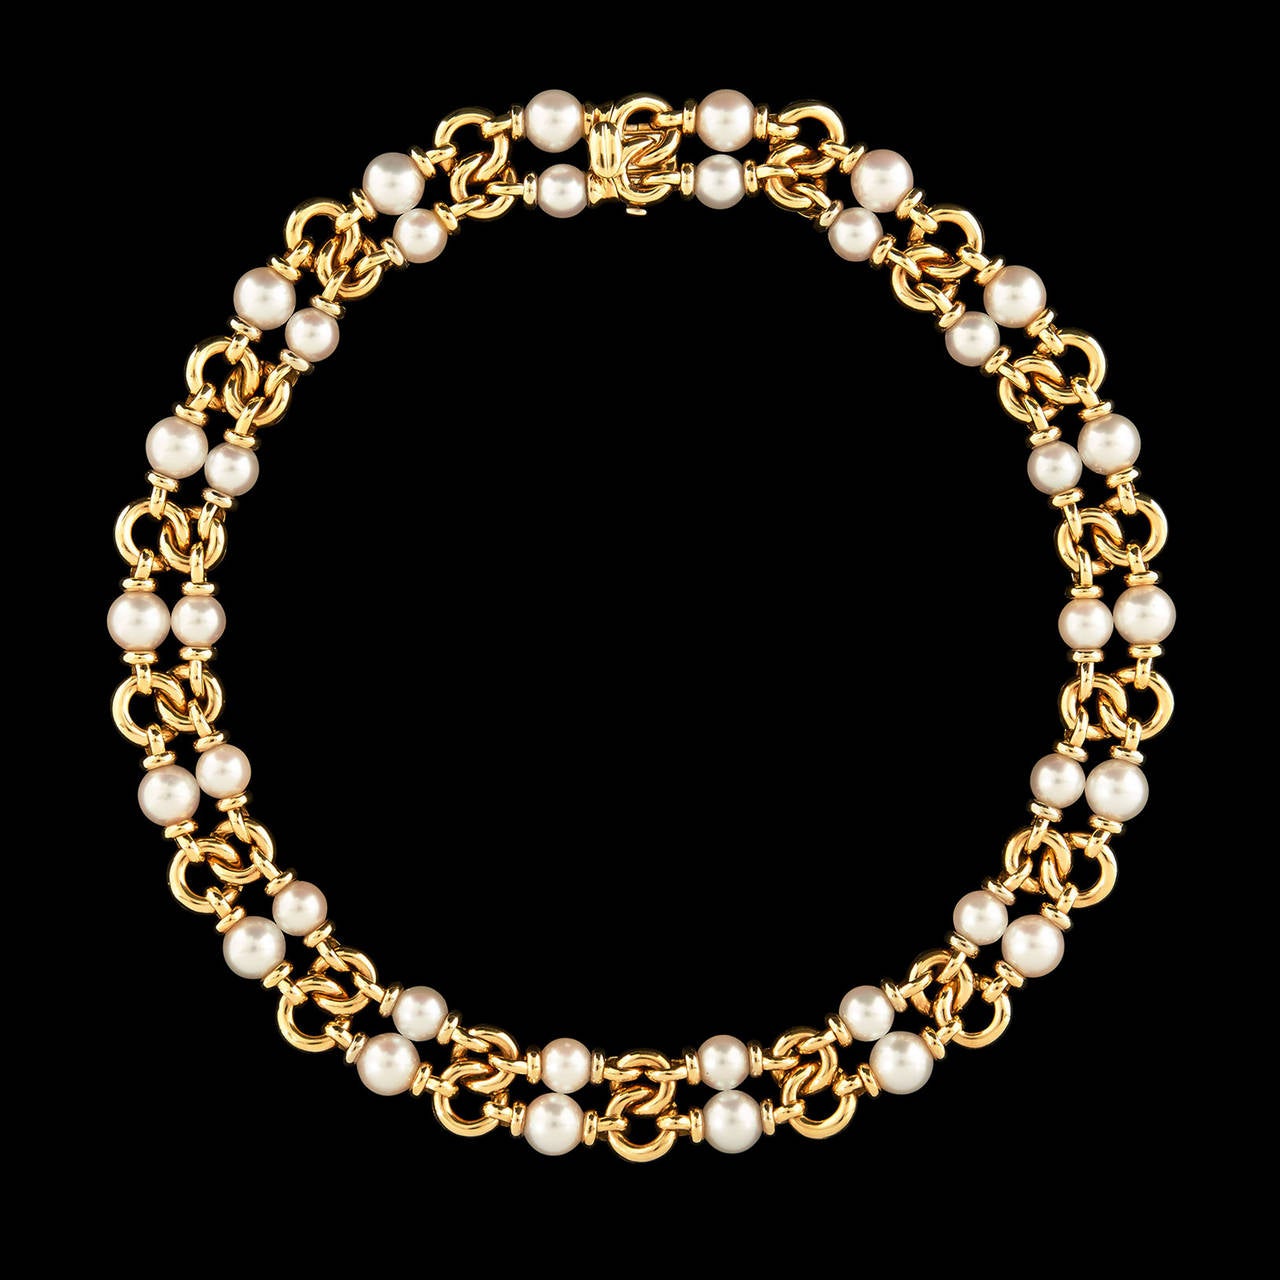 Bulgari Necklace Featuring Japanese Akoya Pearls in 18Kt Yellow Gold. The pearls range in size, the top row 8mm and the bottom row 7mm. The necklace is 15 inches long and a half inch wide and weighs 113.1 grams.